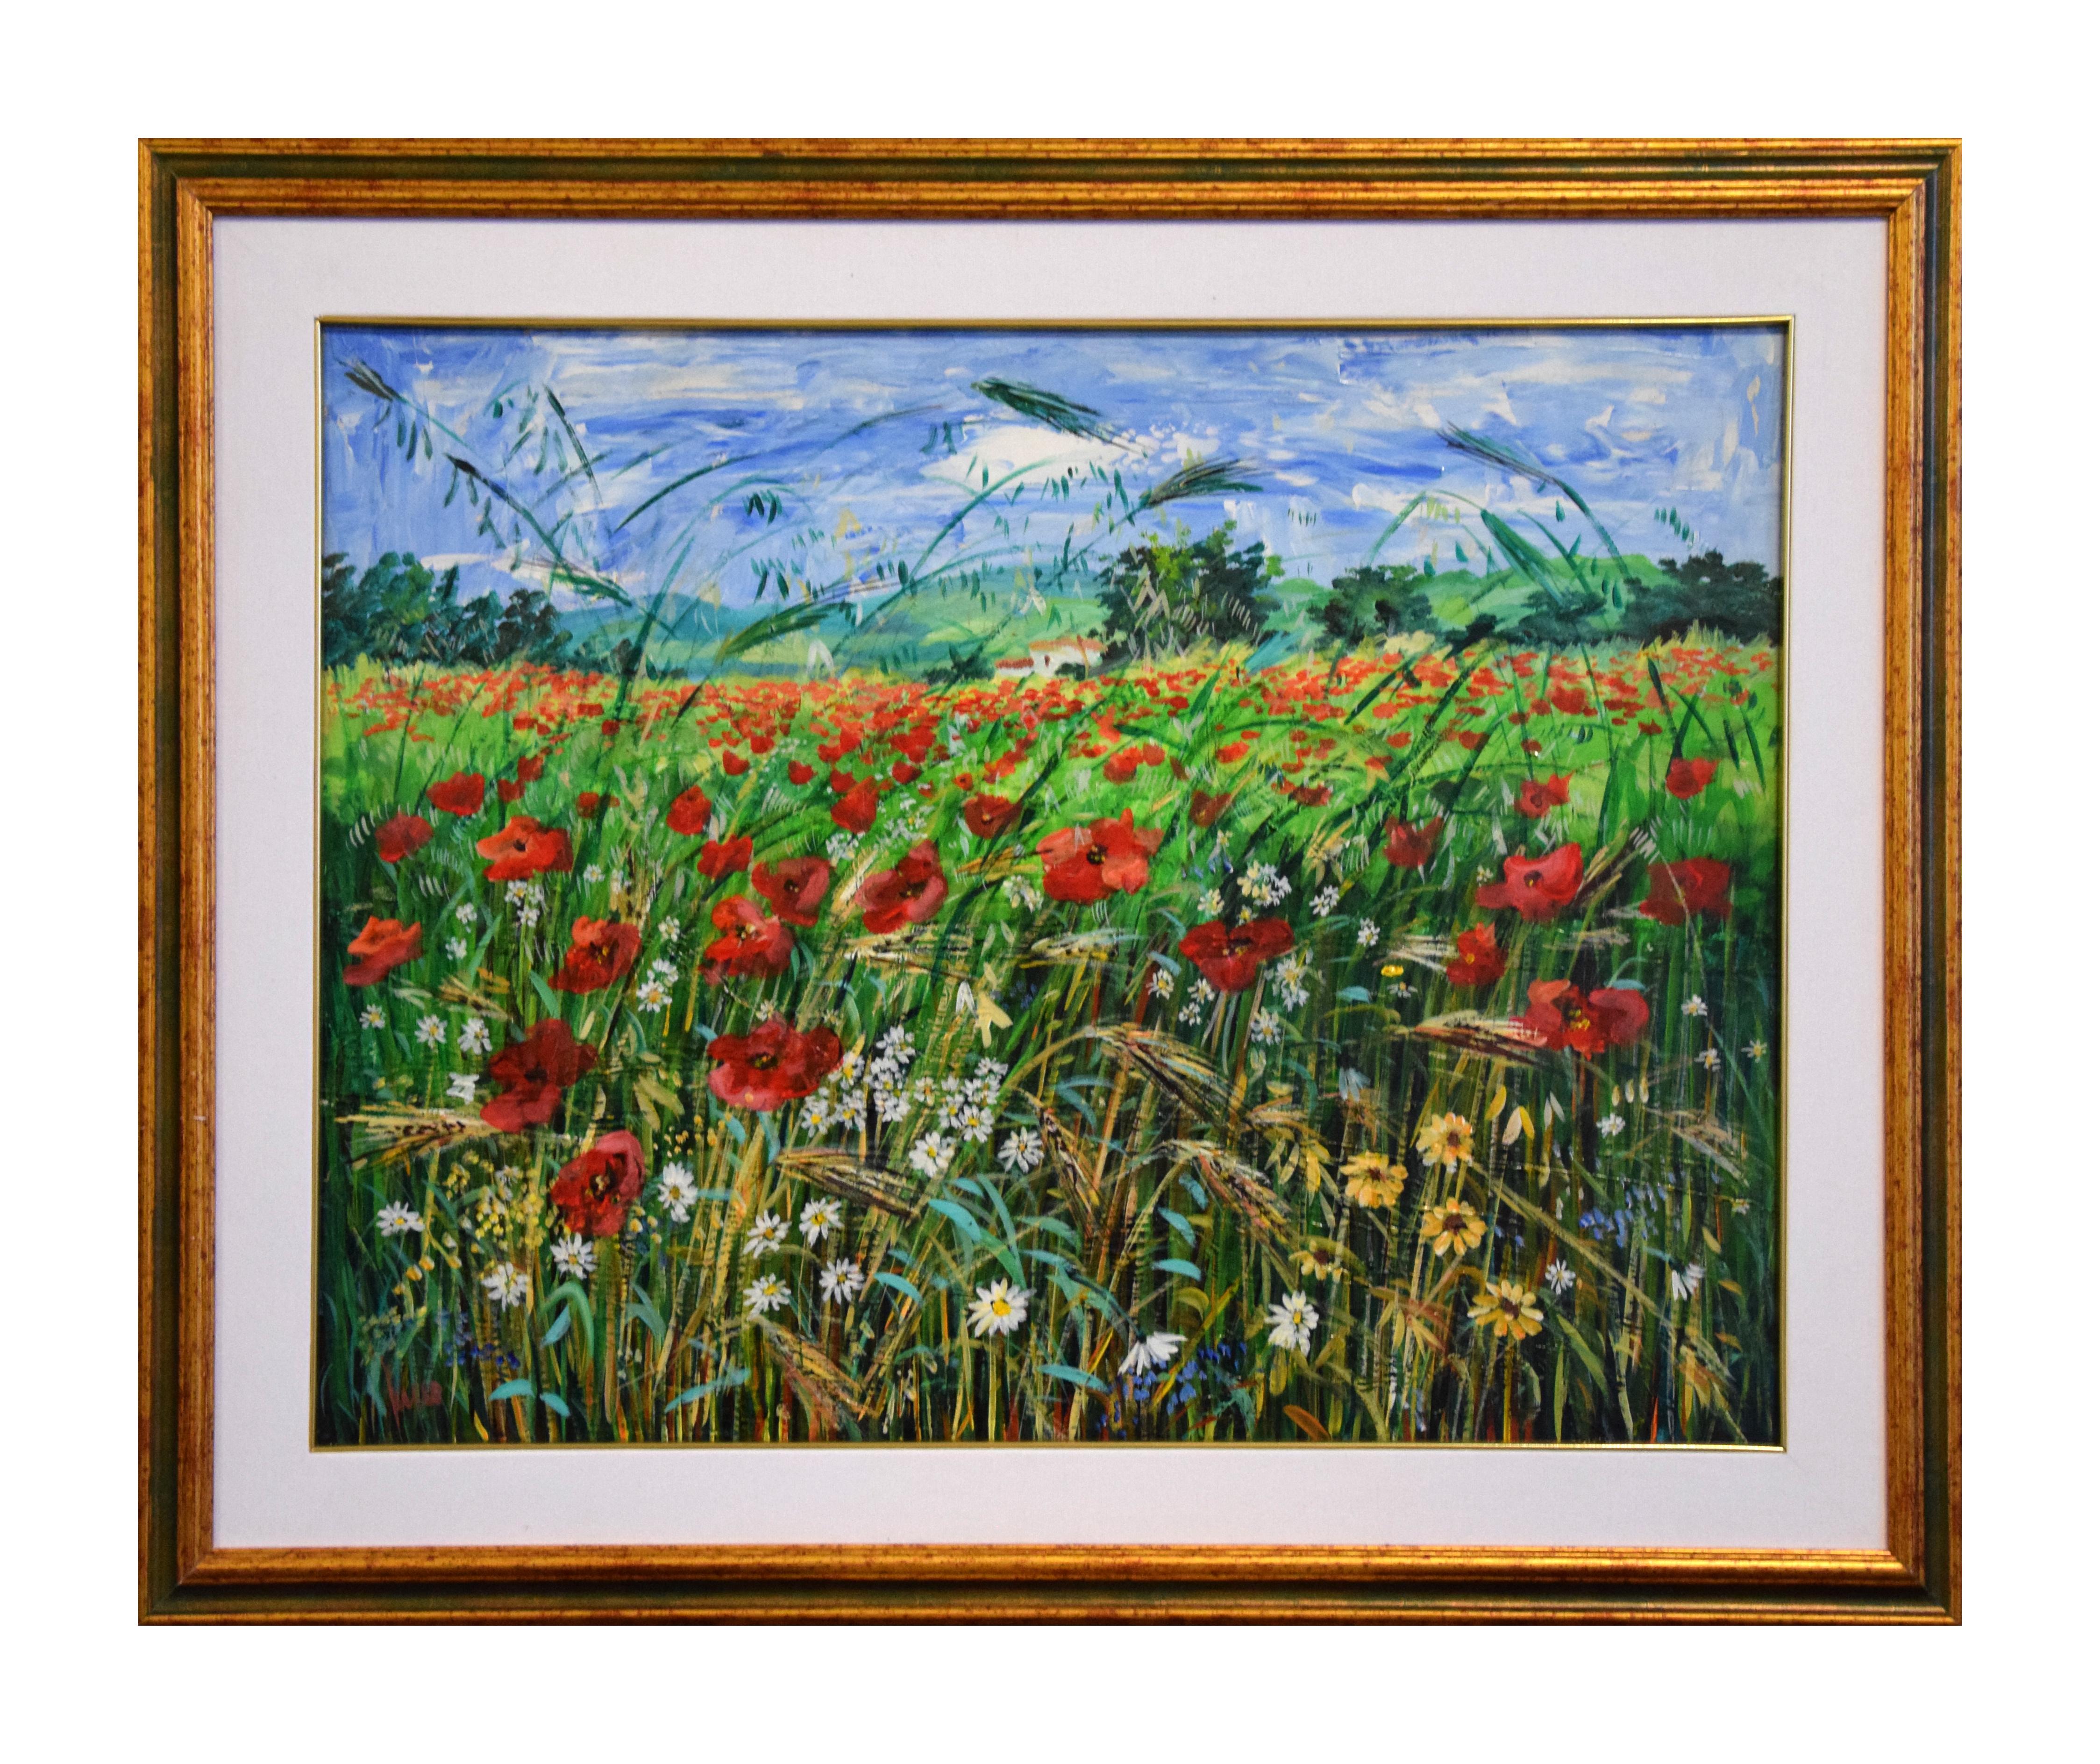 Paesaggio Toscano is an amazing oil painting on canvas realized by the Italian contemporary artist Luciano Sacco.

Including a frame (78 x 98 cm). Hand-signed by the artist on the lower left.

The painting represents a colorful rural landscape with